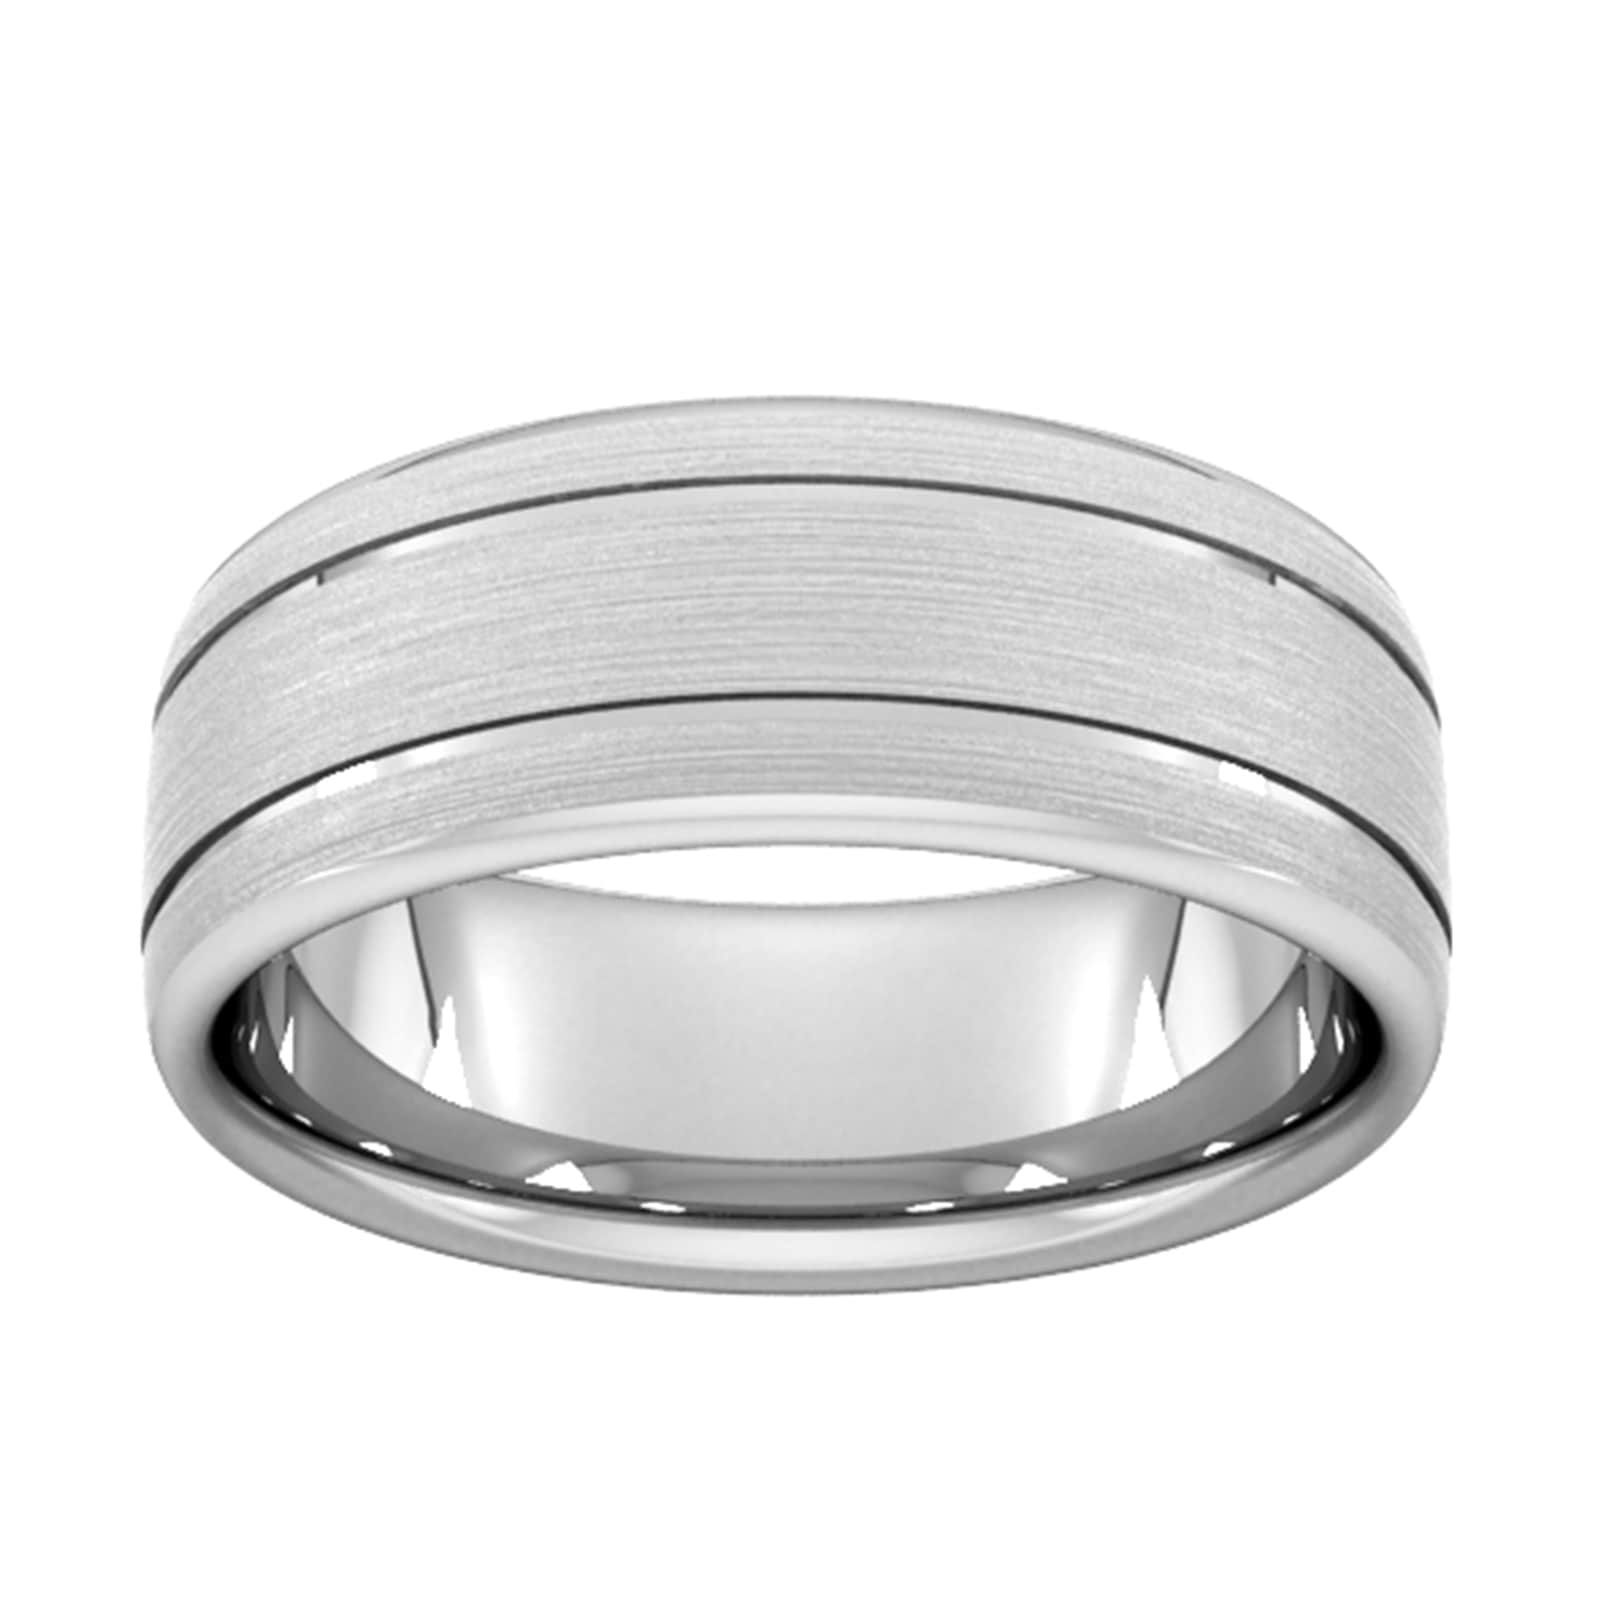 8mm Traditional Court Standard Matt Finish With Double Grooves Wedding Ring In Platinum - Ring Size R